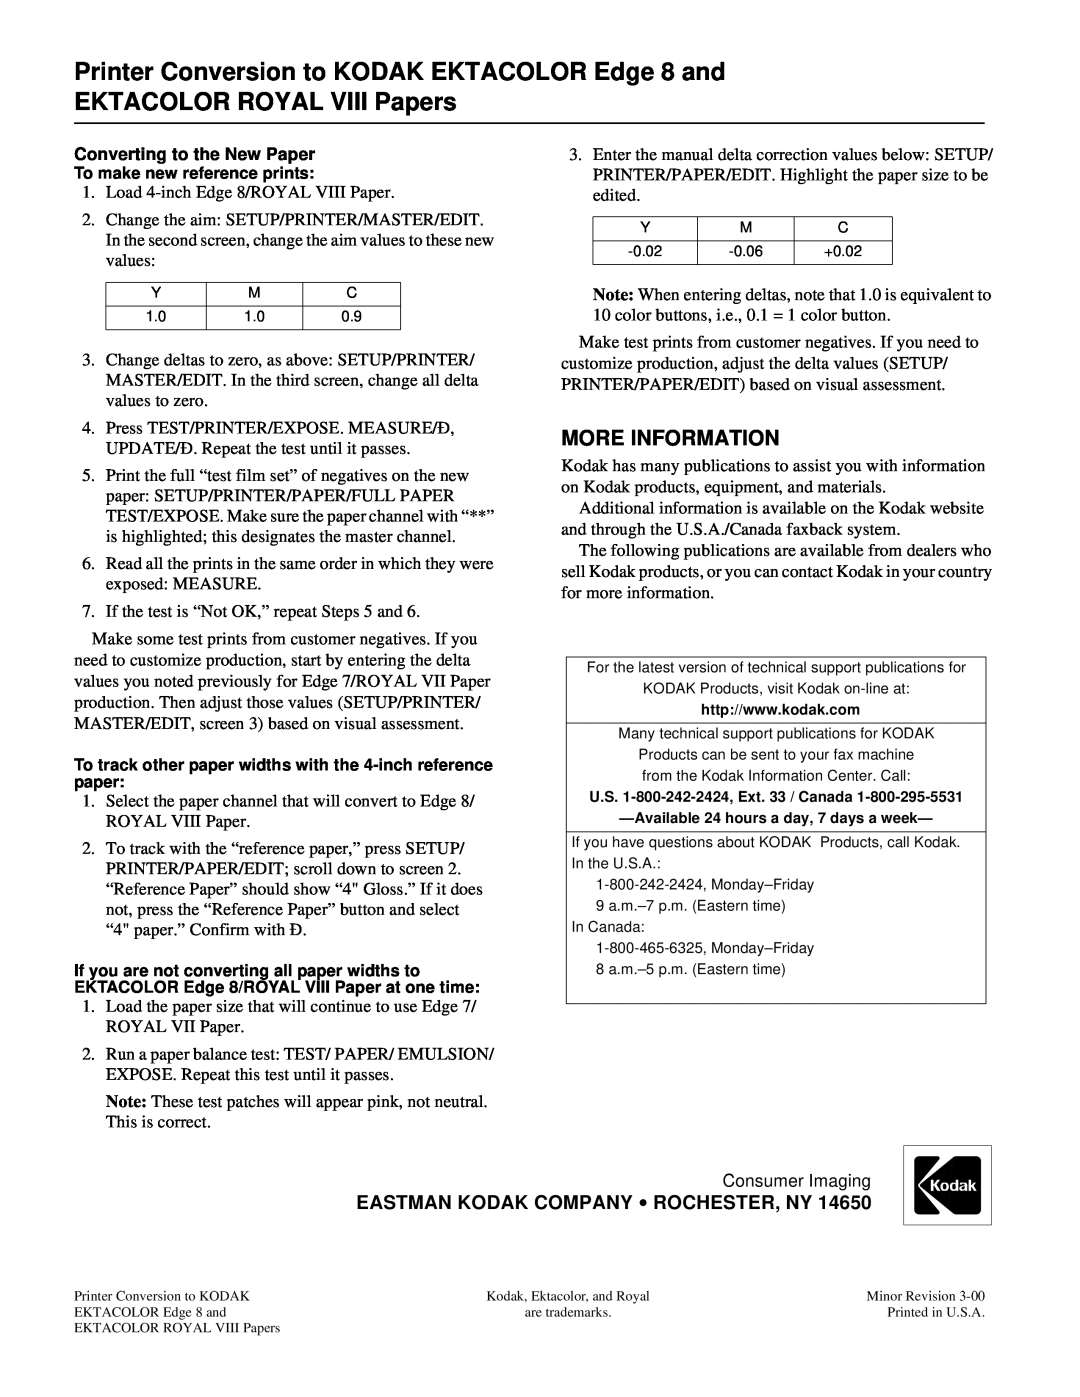 Kodak CIS-201 specifications More Information, Eastman Kodak Company Rochester, Ny, Converting to the New Paper 